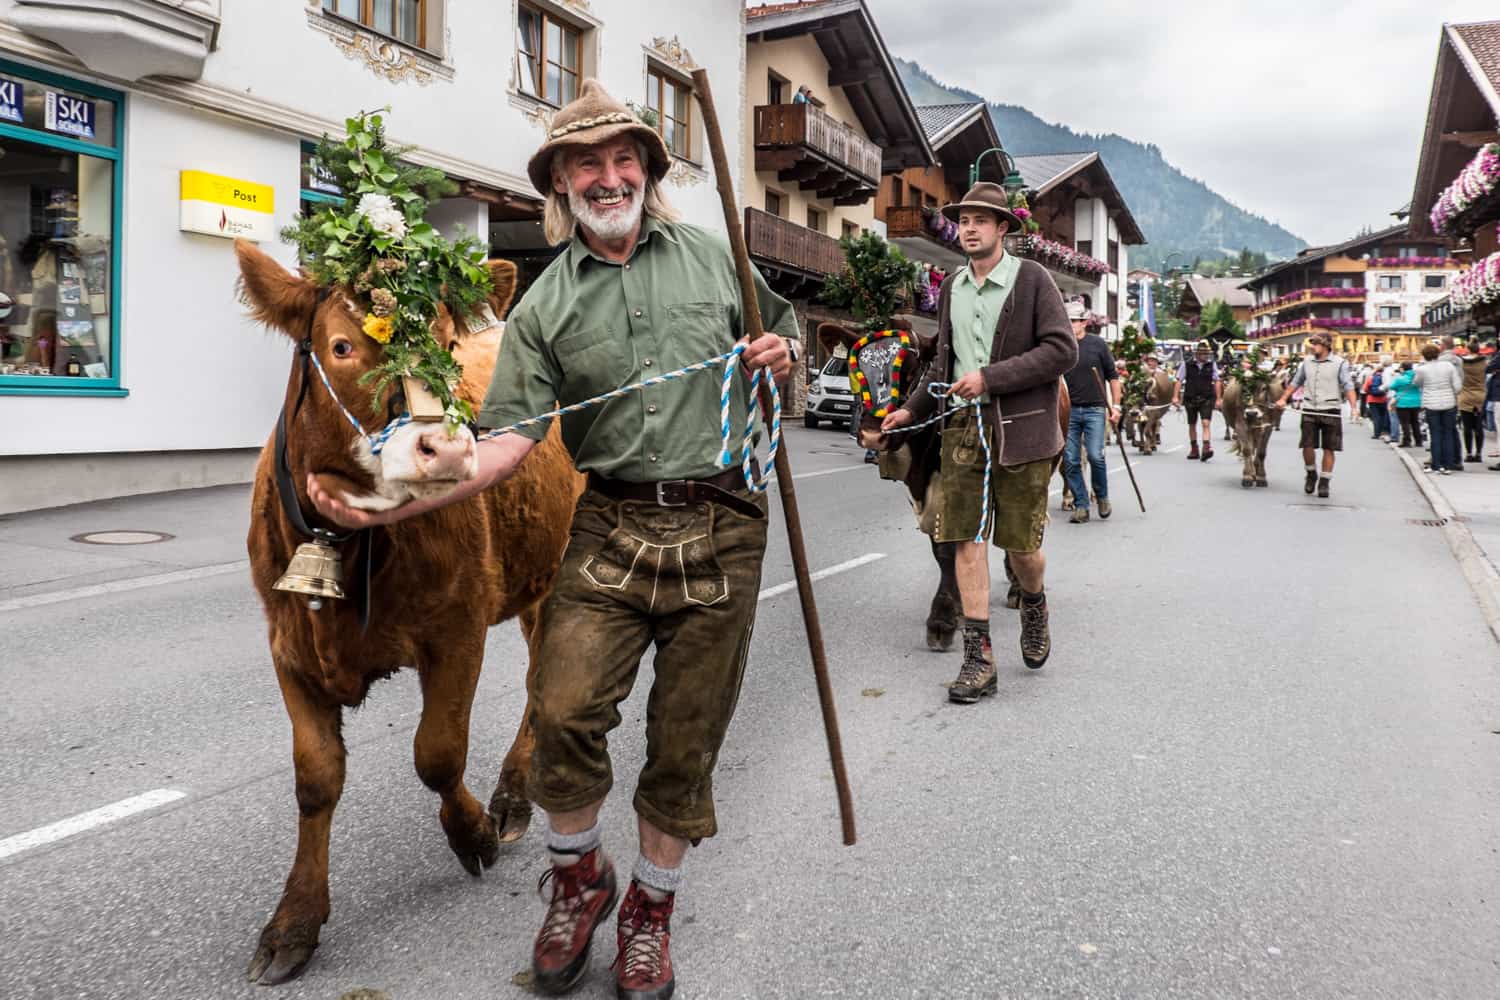 Farmers and cows at Almabtrieb in Lermoos village in Zugspitz Arena, Tirol, Austria